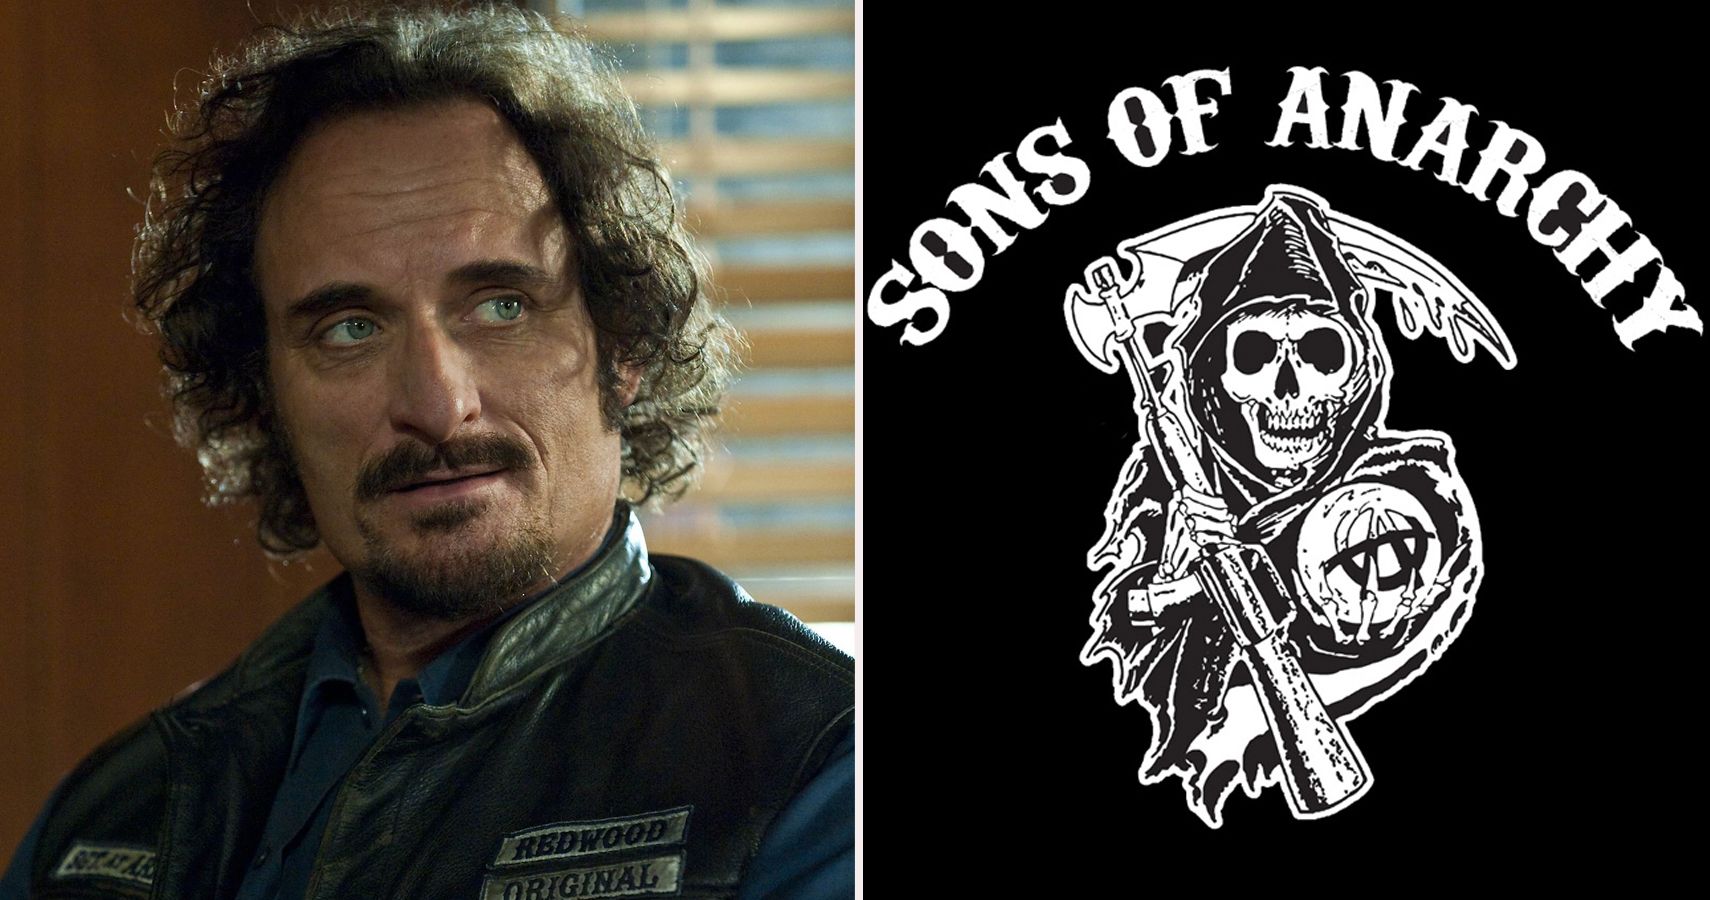 What's Alan Watching?: Sons of Anarchy, Balm: The situation 'shroom